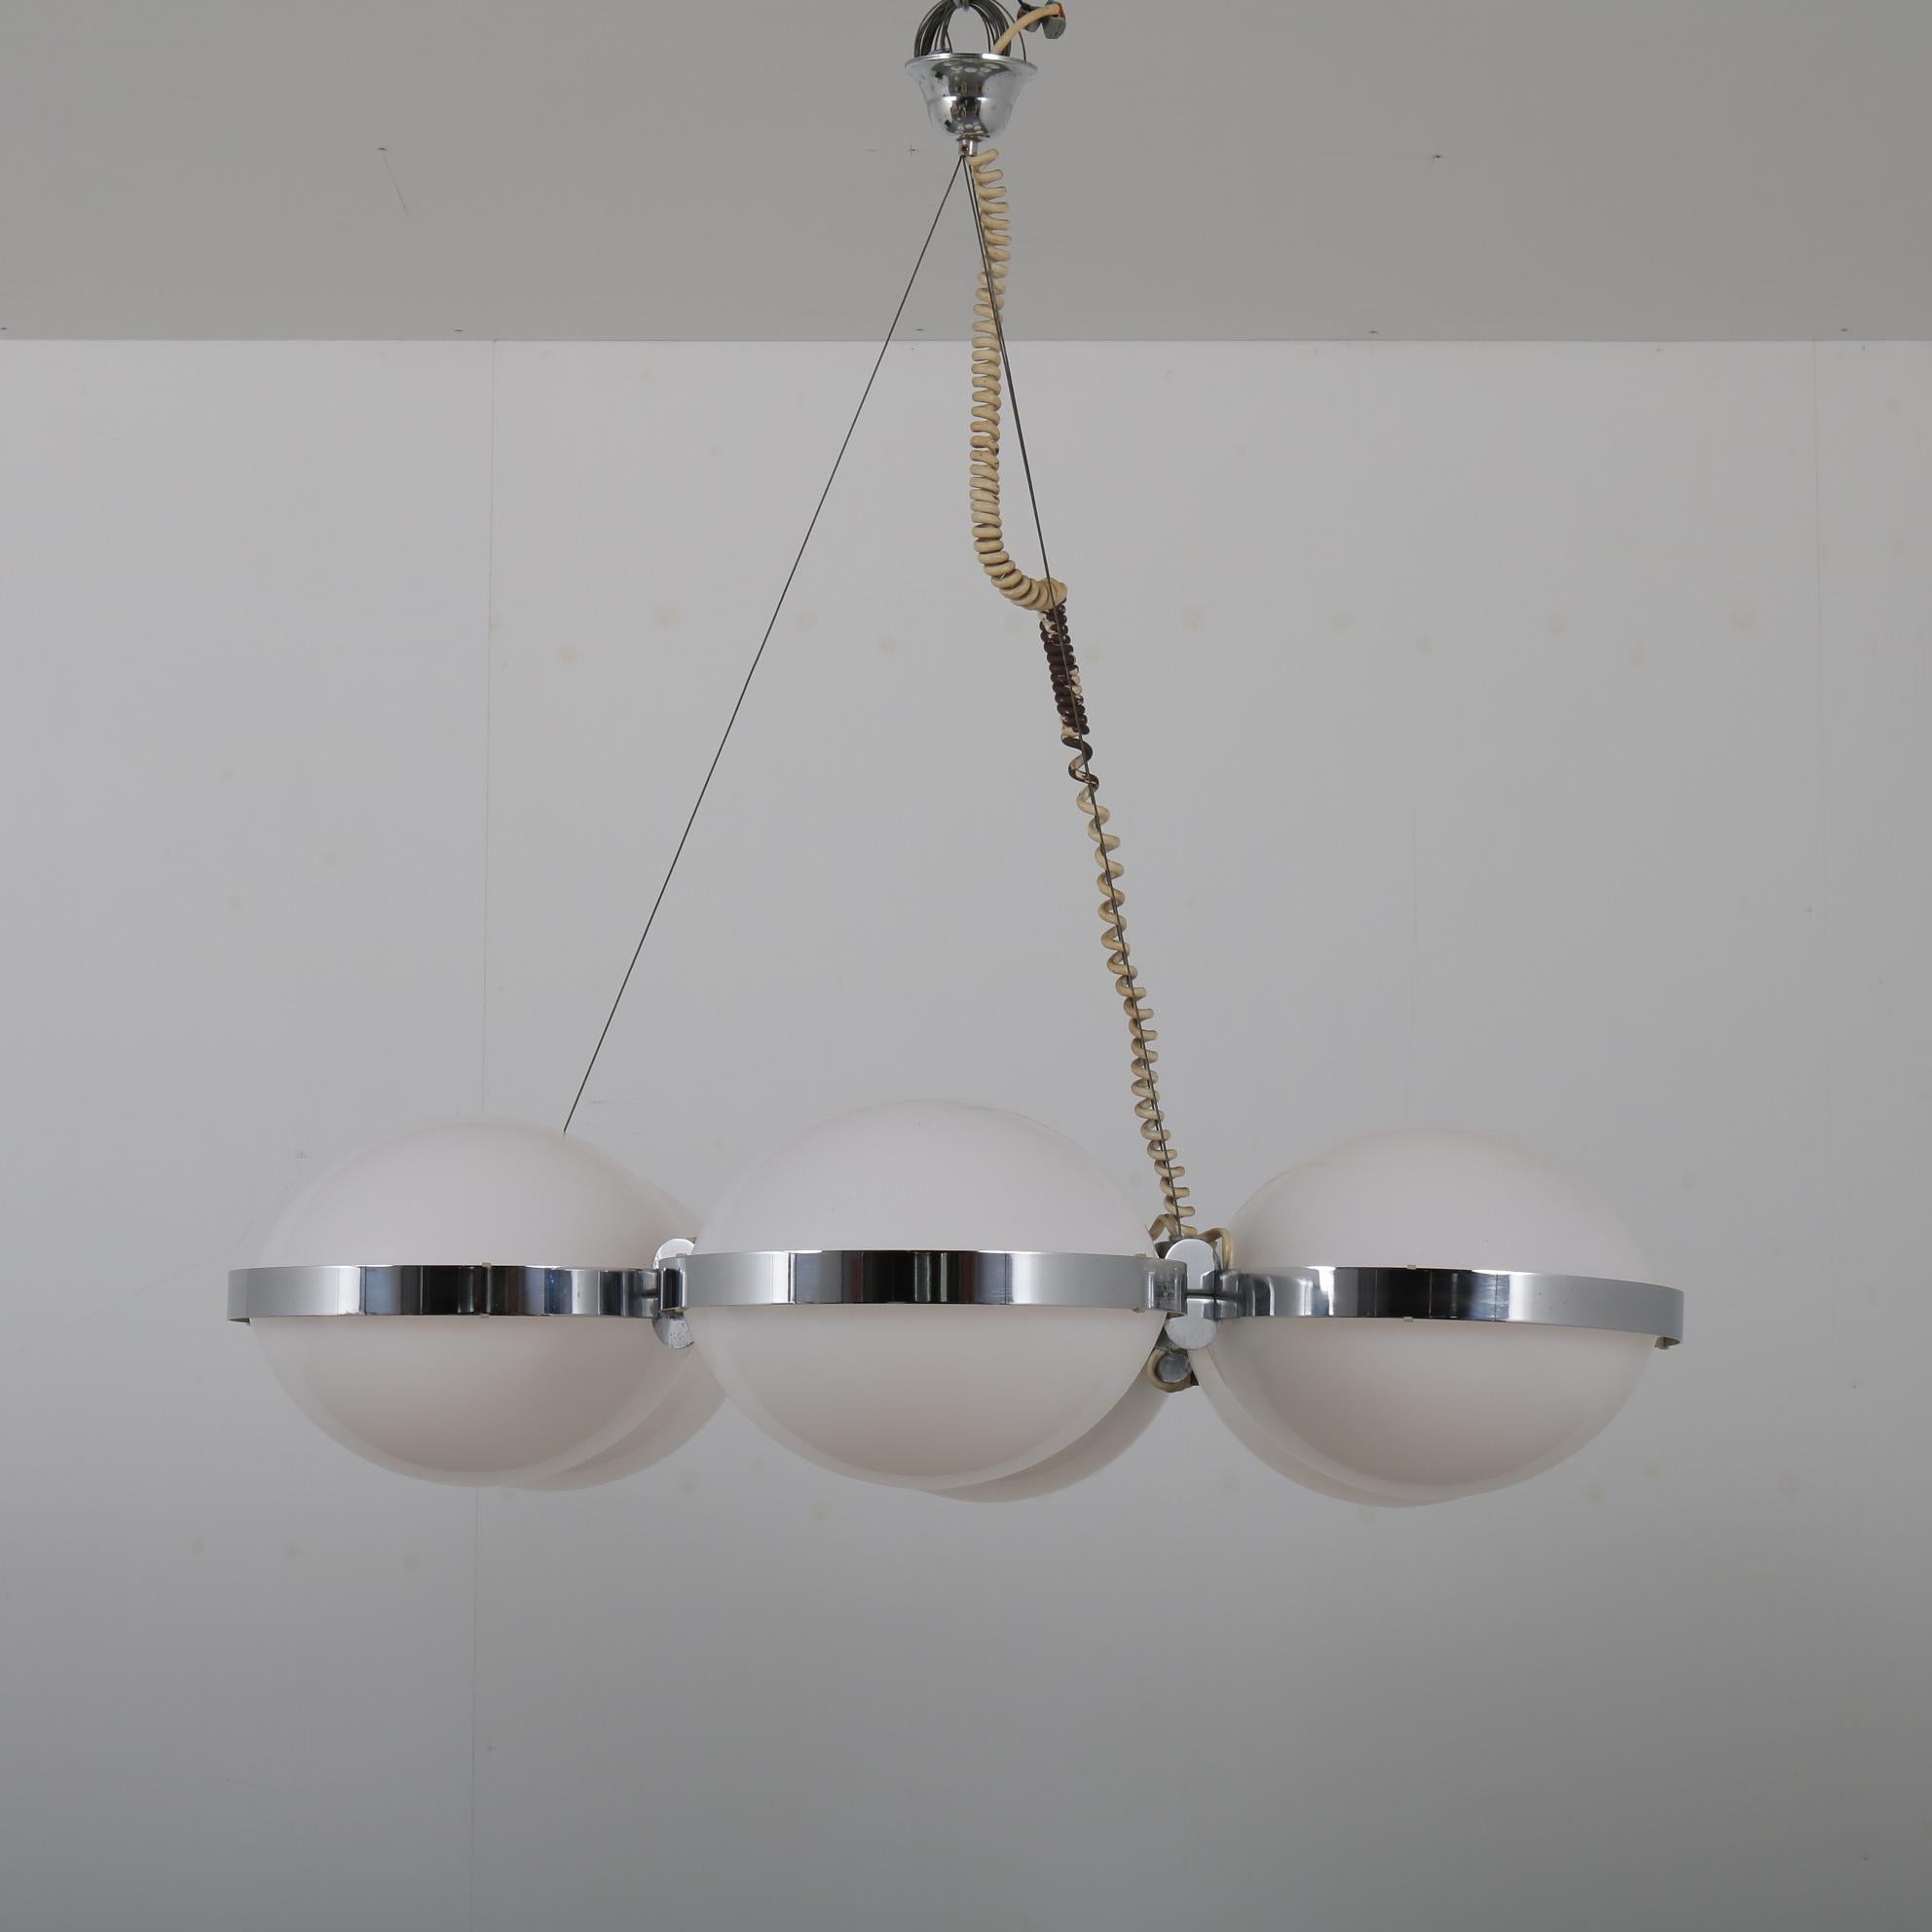 An eye-catching, large chandelier / hanging lamp manufactured by Vest Leuchten in Austria around 1960.

This is a beautiful Austrian lamp, made of high quality chrome plated metal holding six milk glass disks. There’s a light bulb within each disk